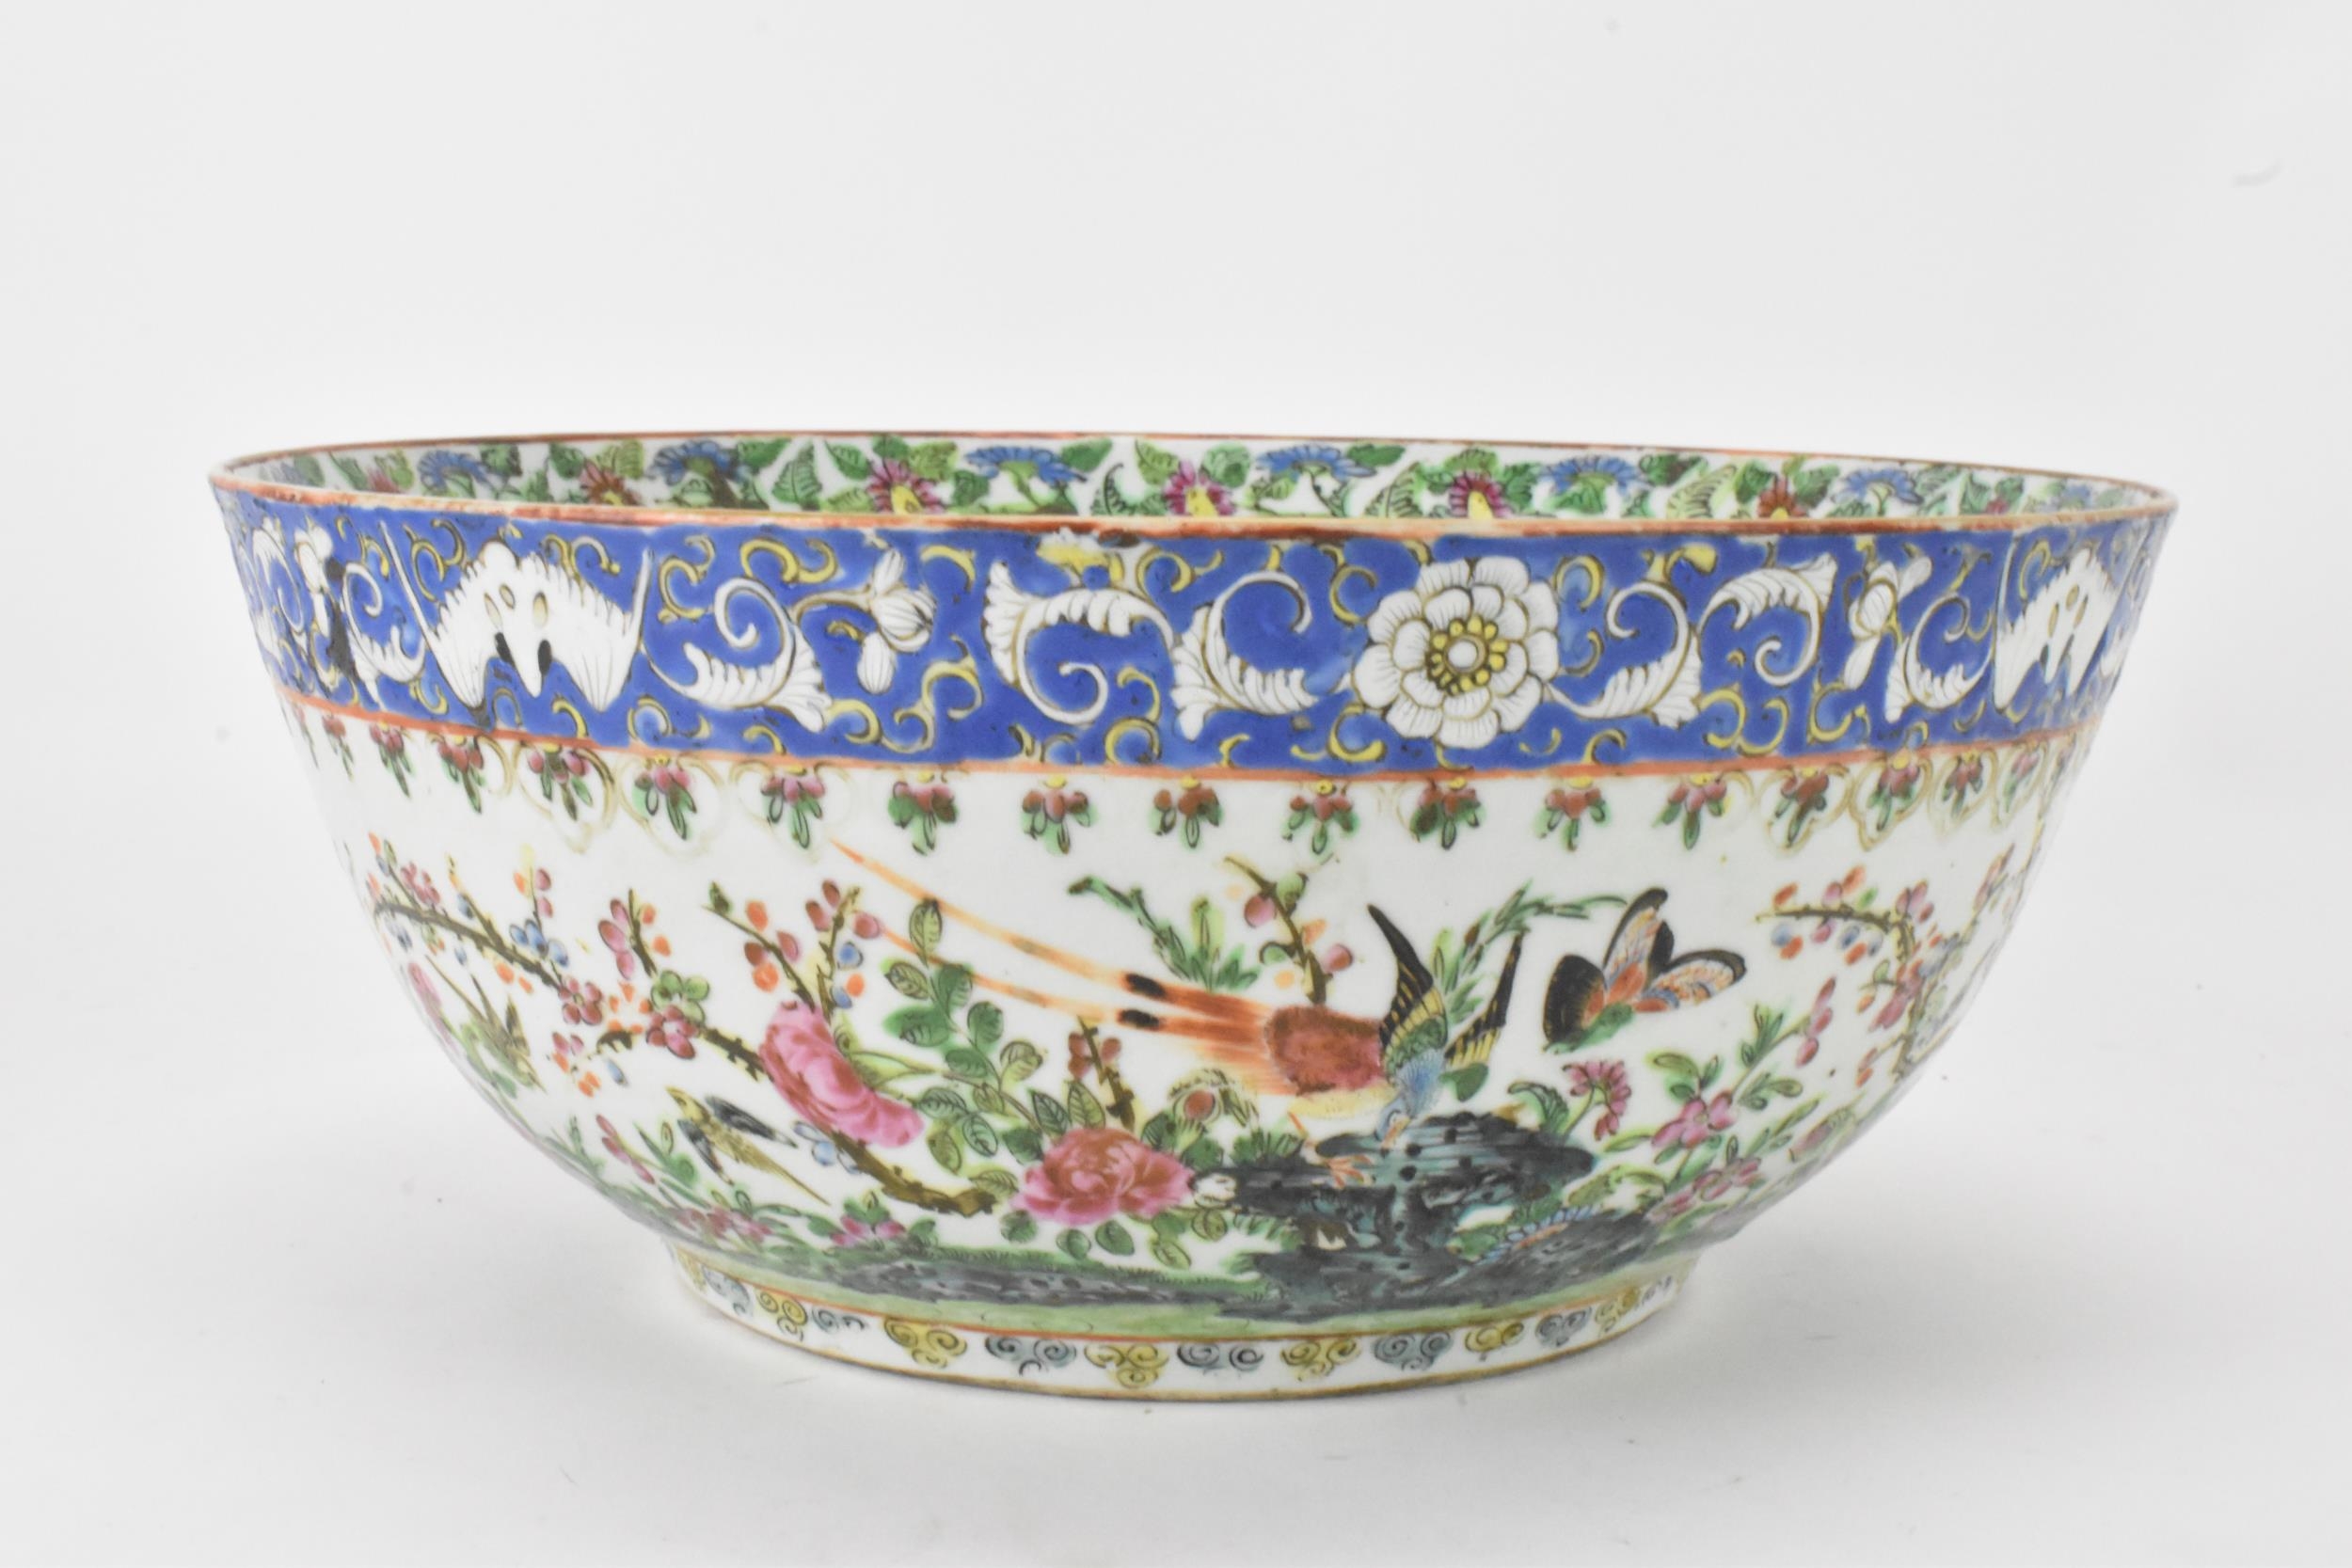 A near pair of Chinese export Canton famille rose punch bowls, Qing dynasty, late 19th century, - Image 9 of 15